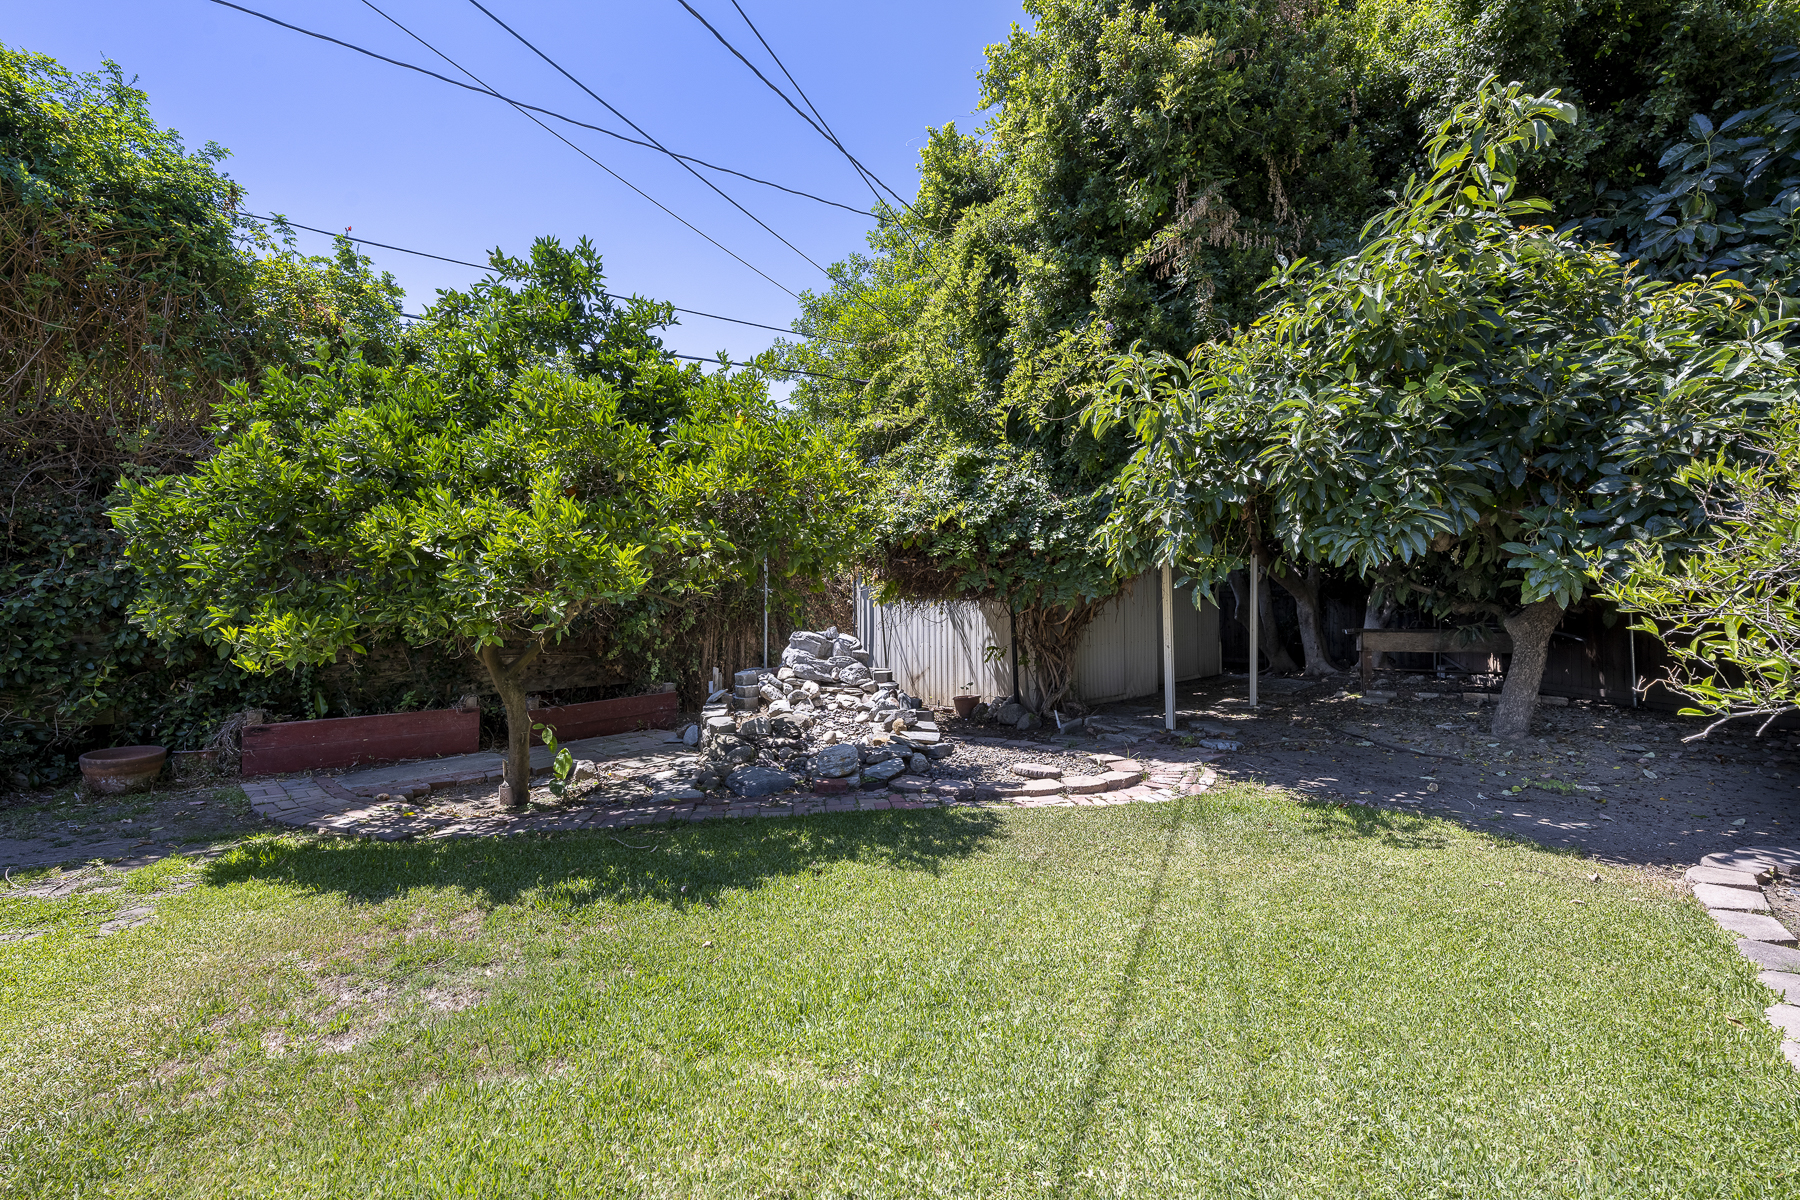 411 Truman Ave, Fullerton, CA 92832: Outdoor storage shed and trees.